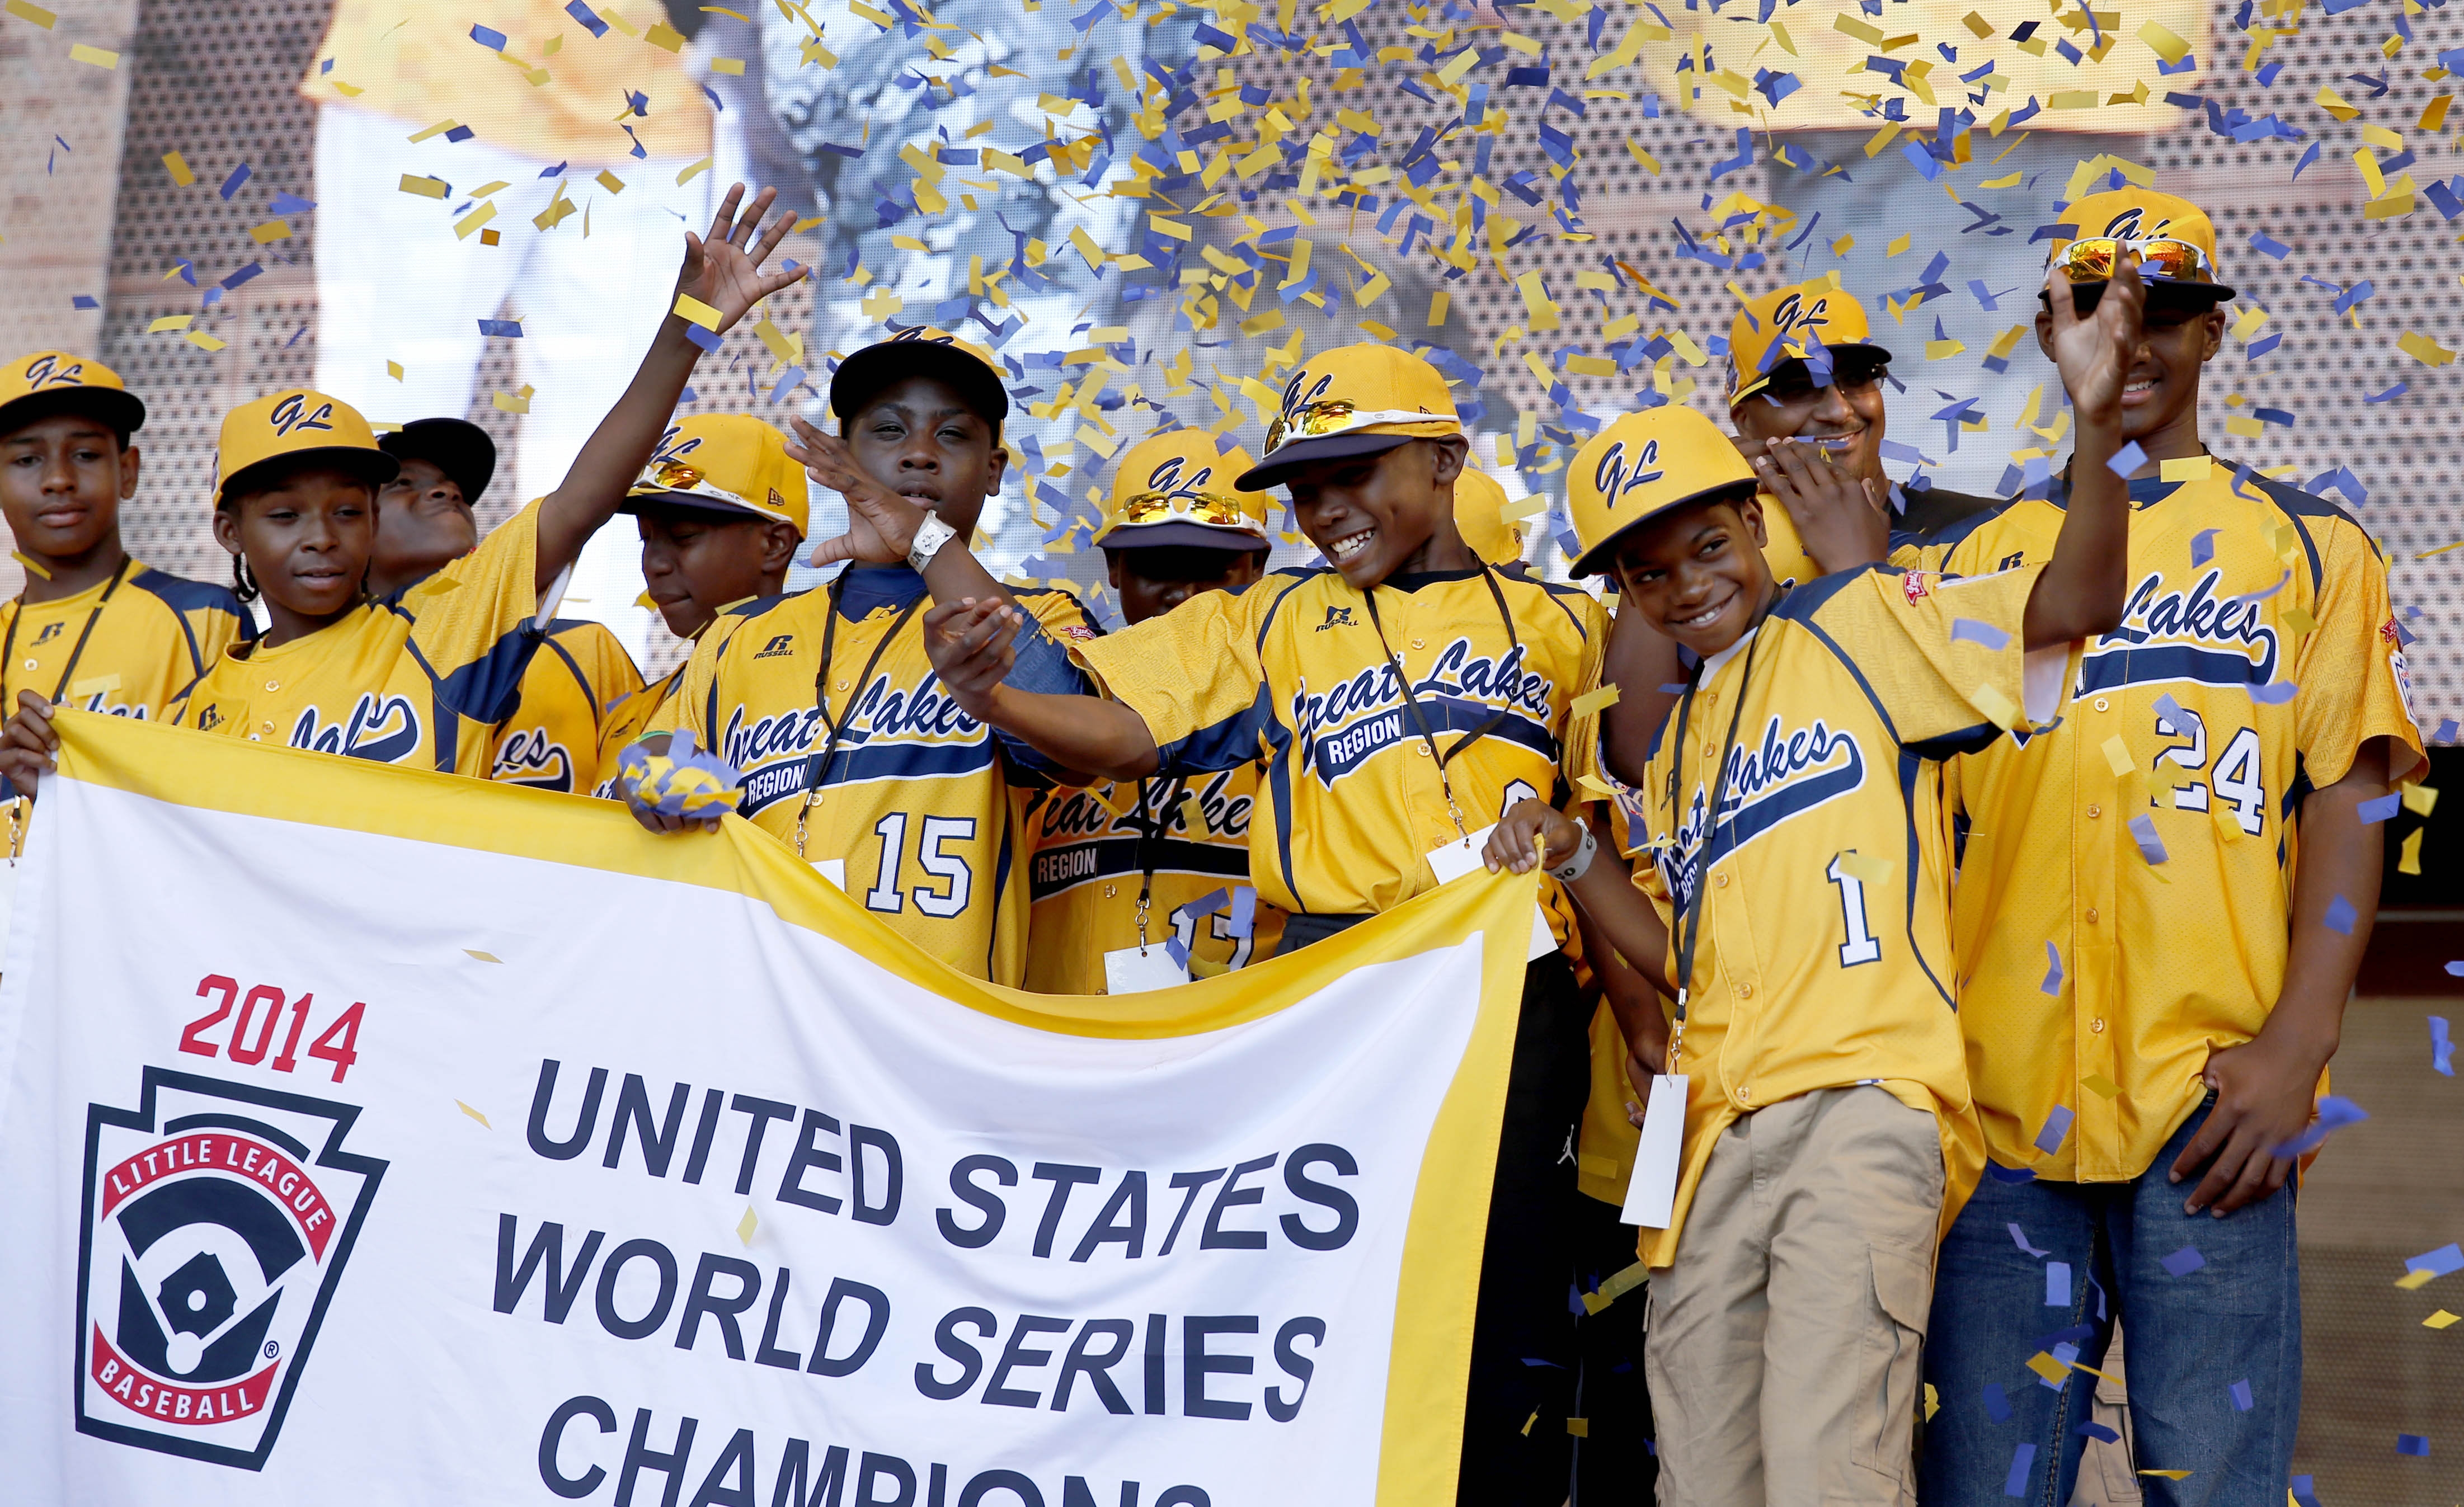 Jackie Robinson West Little League teams title stripped for cheating